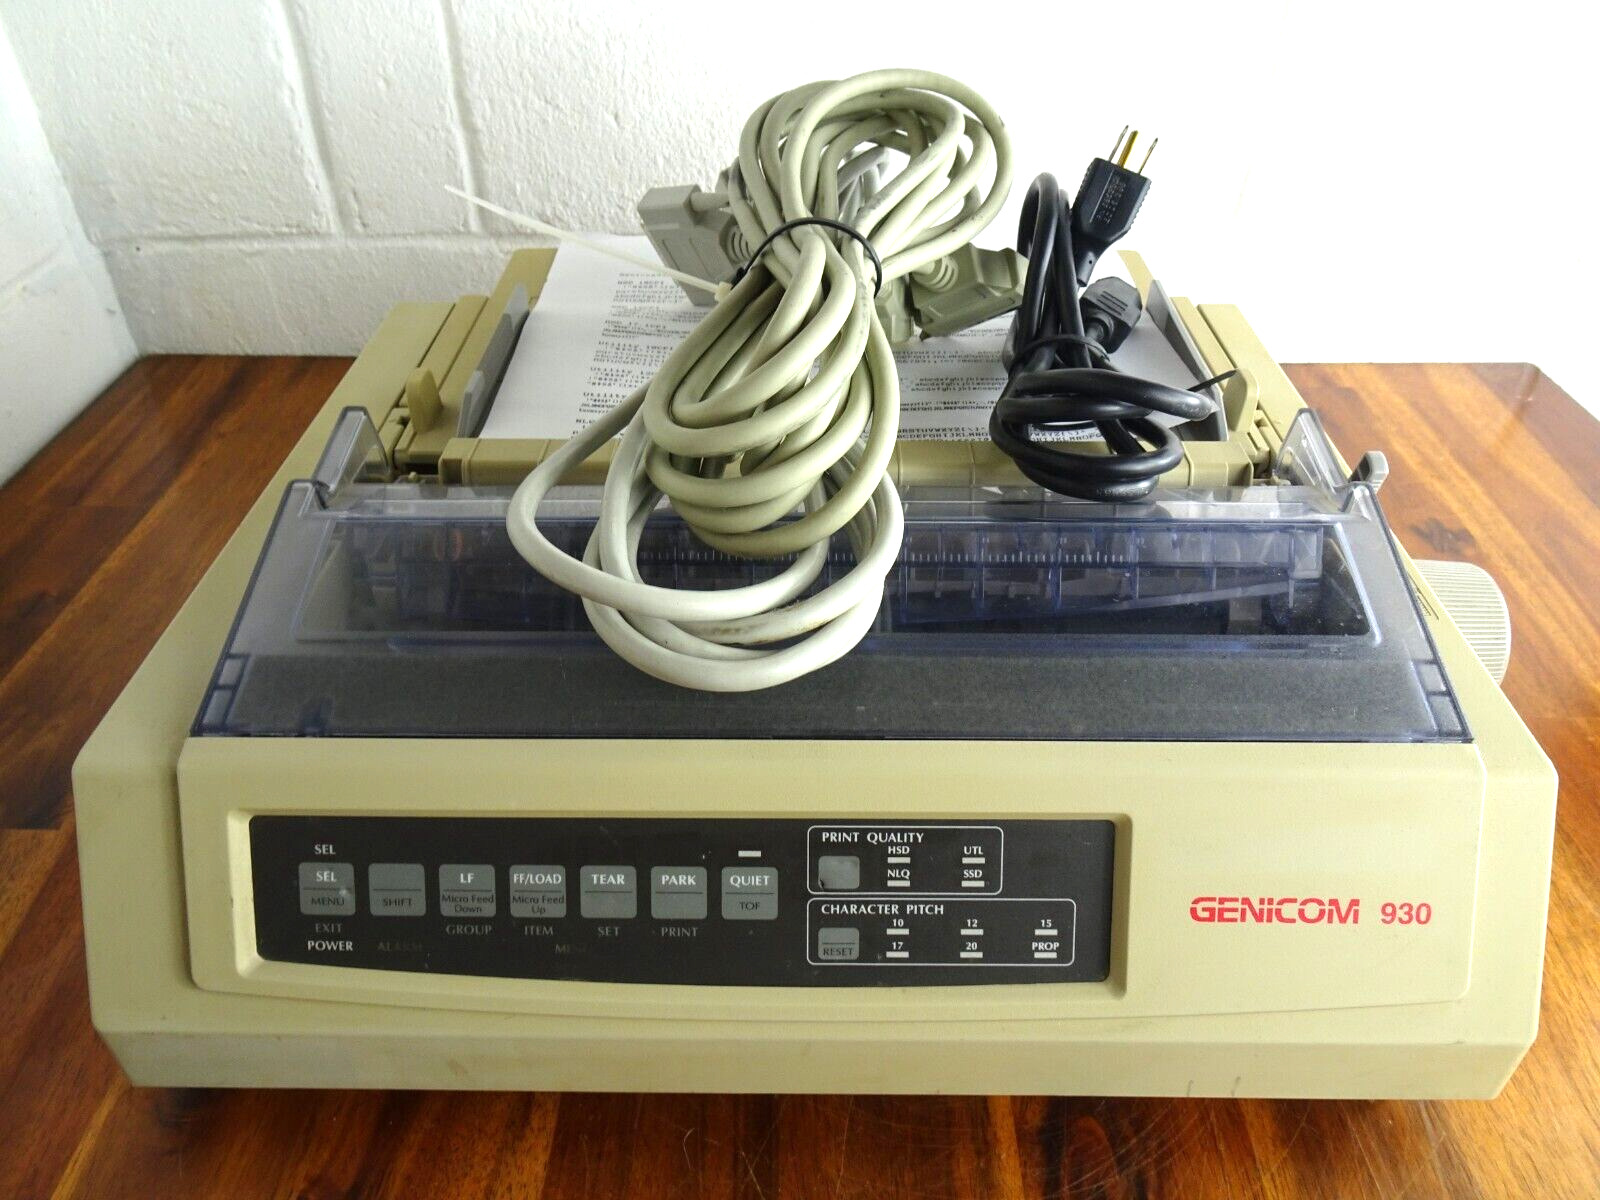 Genicom 930 Vintage Dot Matrix Printer with Ribbon and Cables Tested